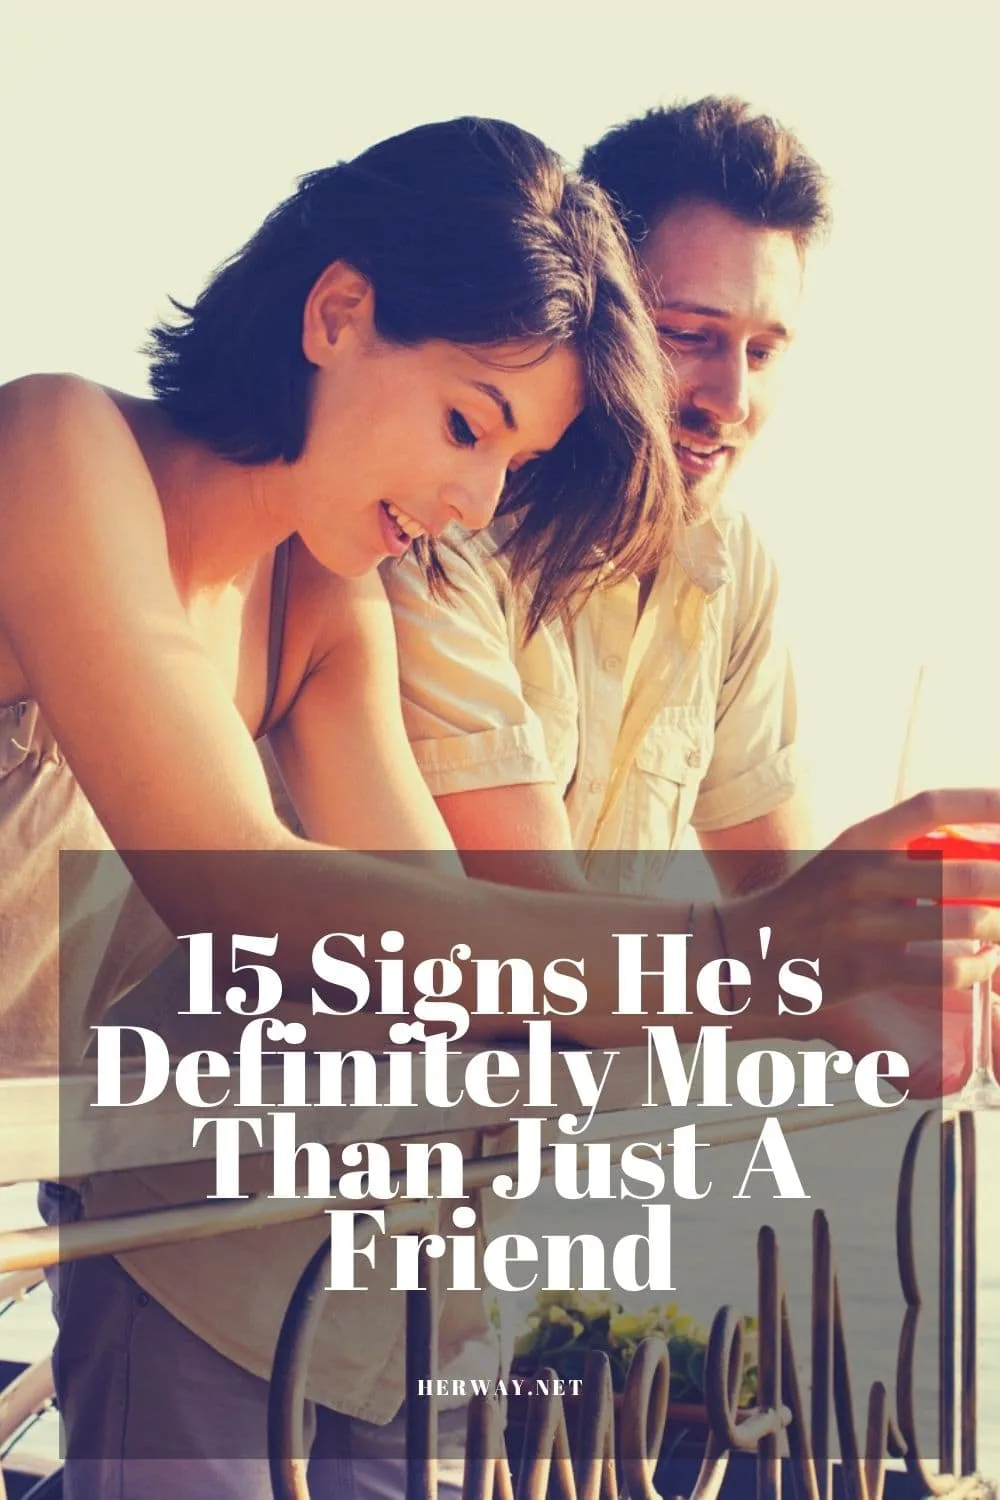 15 Signs He's Definitely More Than Just A Friend